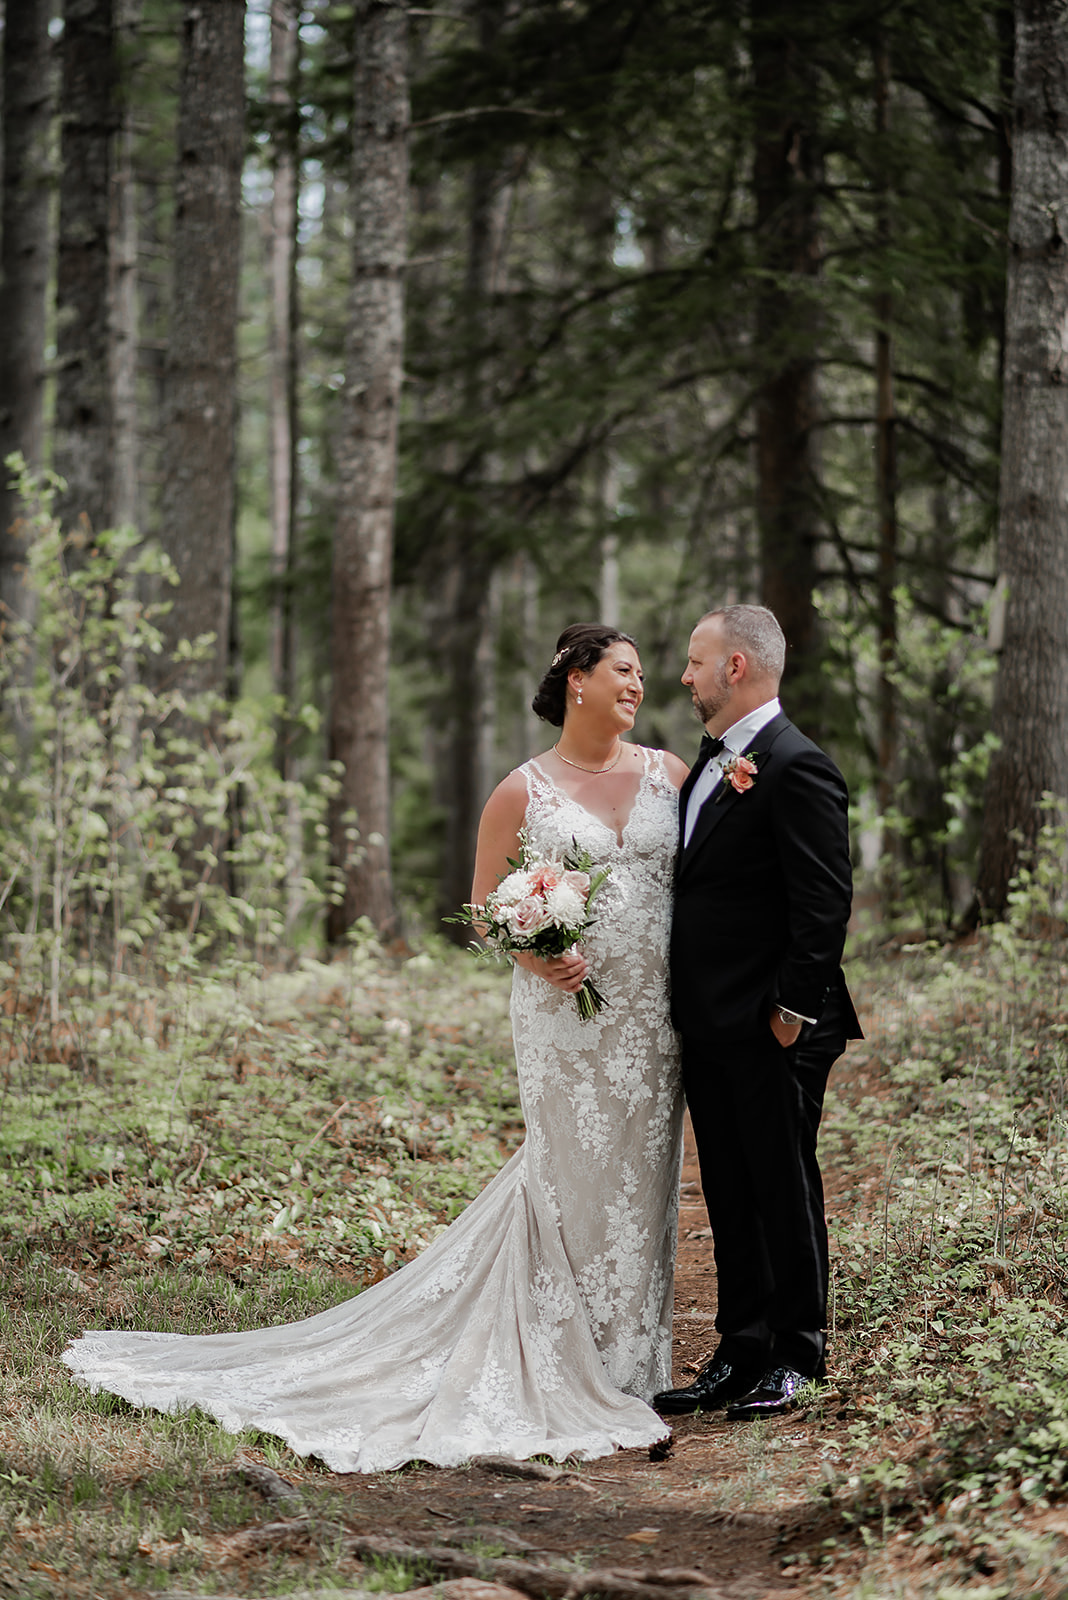 A Bear Mountain Inn wedding. 
The venue is located in Waterford, Maine. It features a stunning view of Bear Pond, and ha